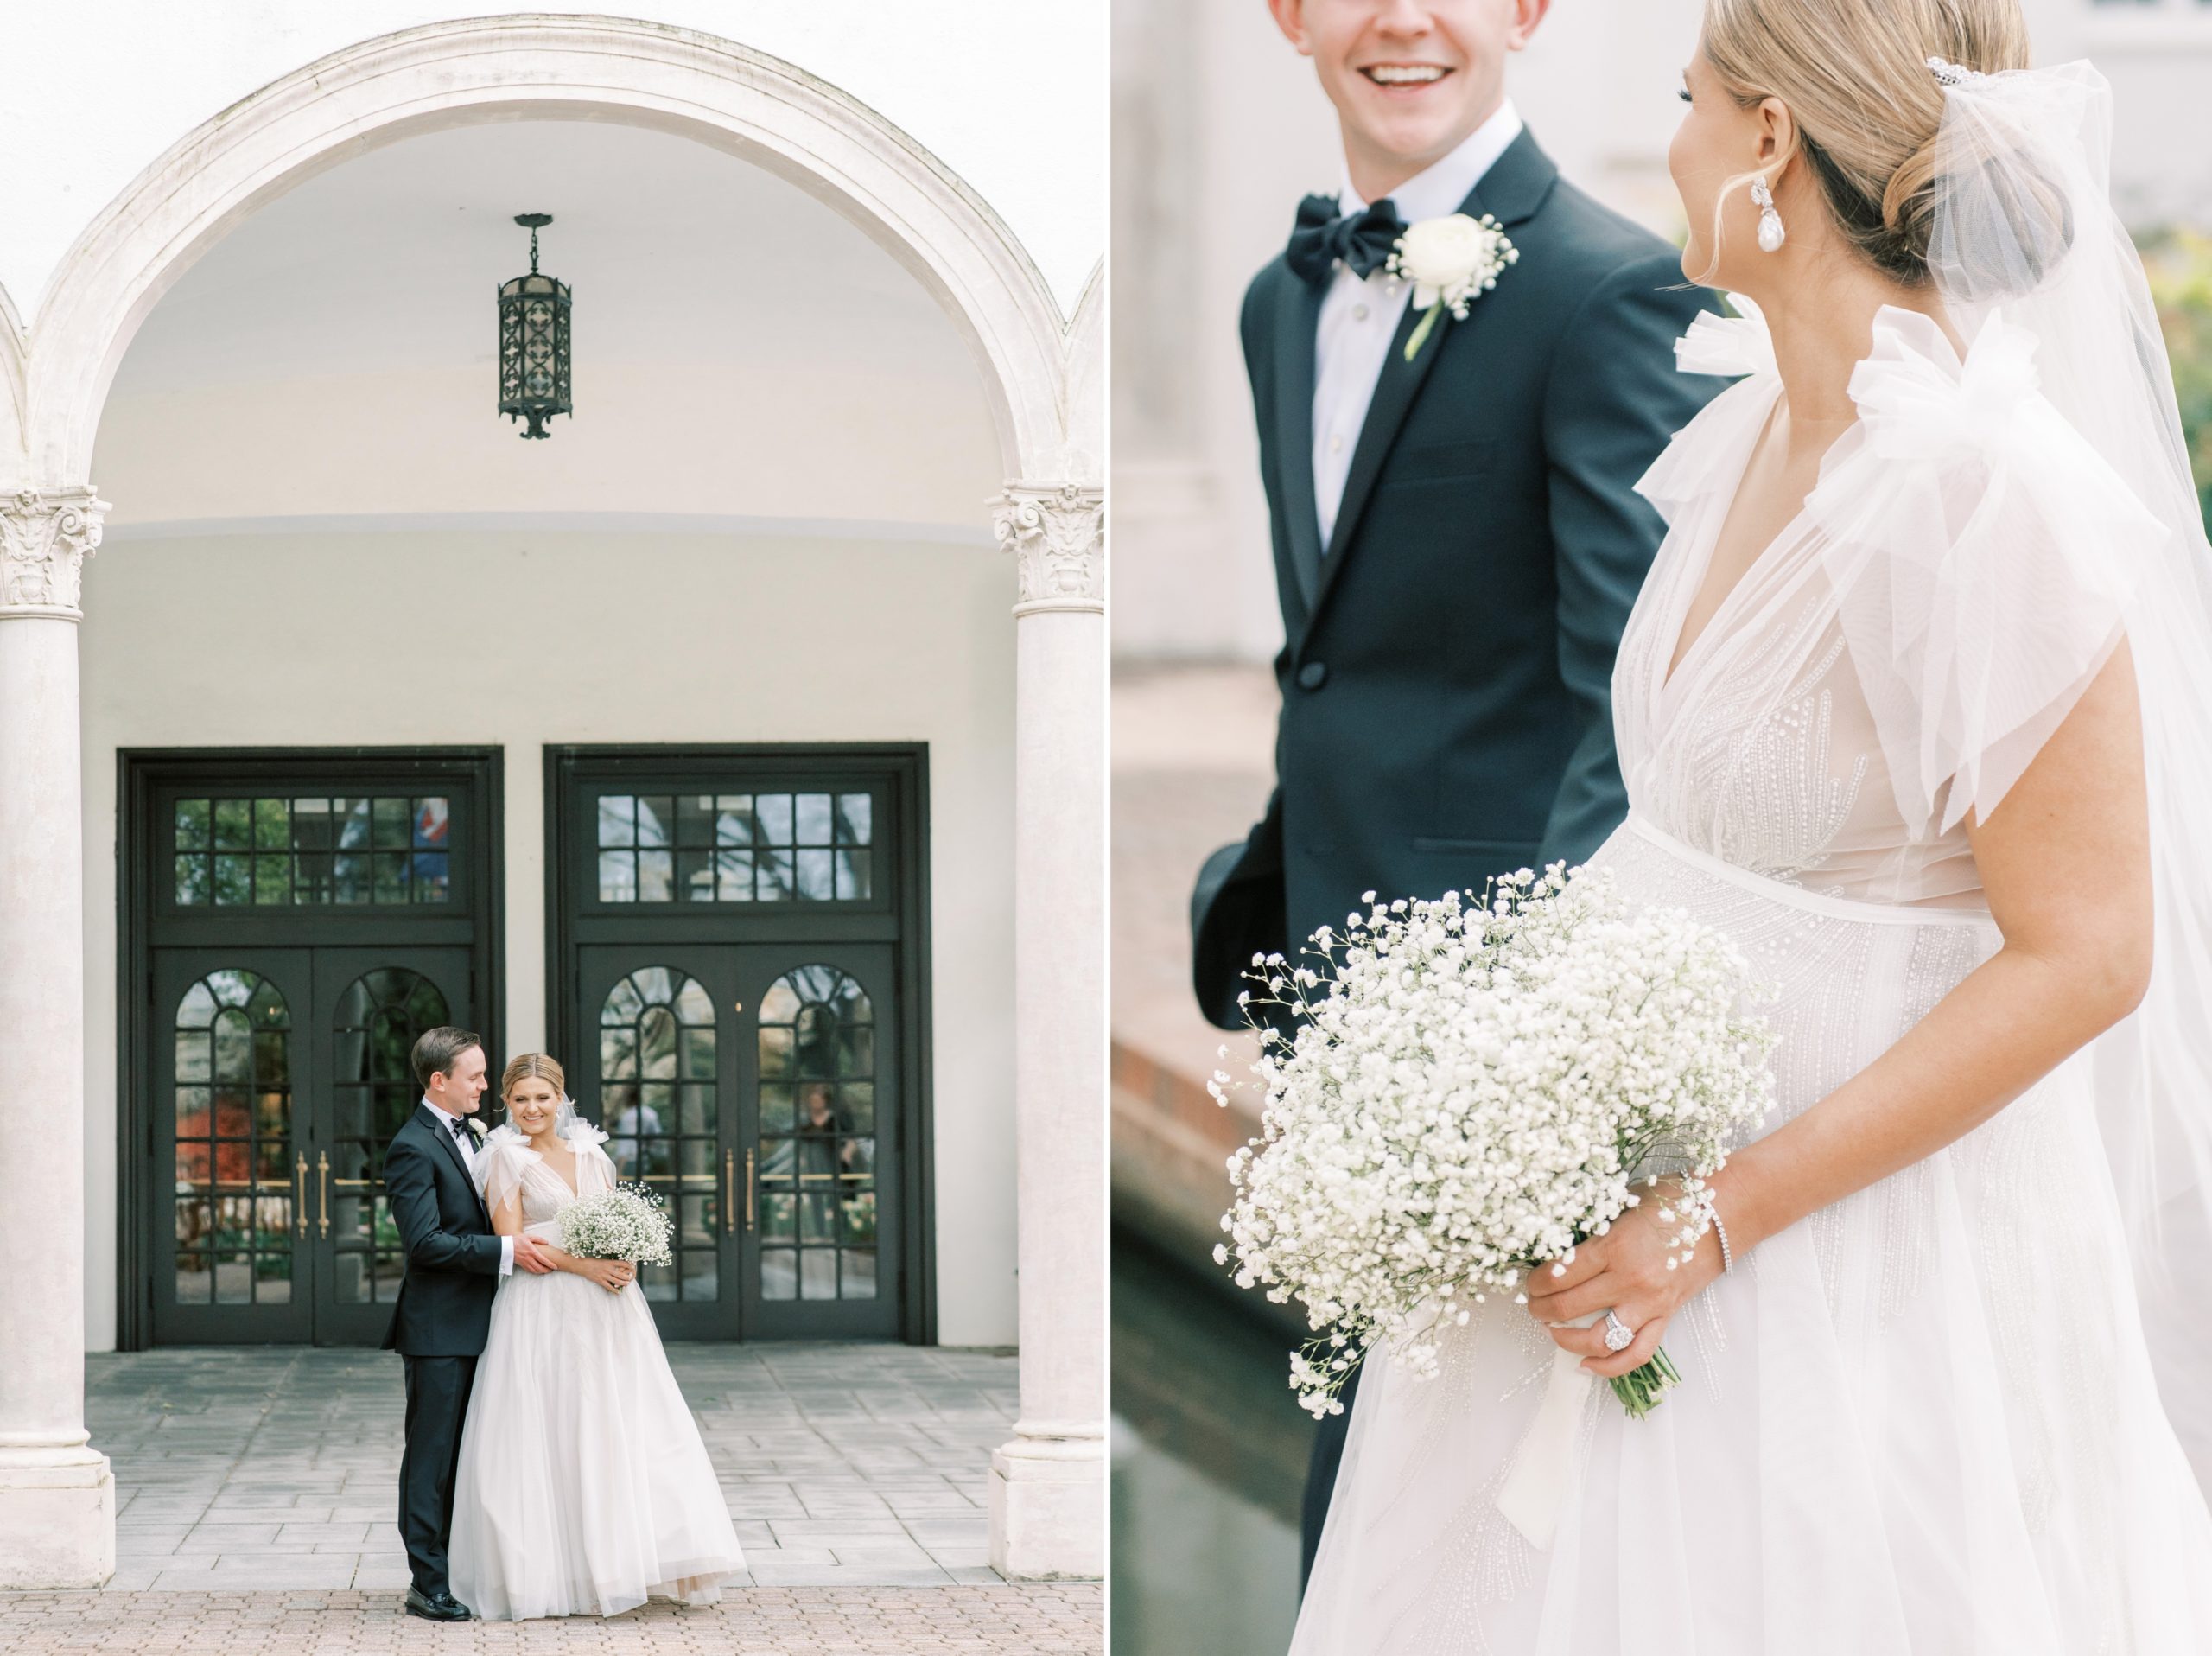 An elegant, black-tie wedding at the Congressional Country Club outside of Washington, DC featuring photography by Alicia Lacey.